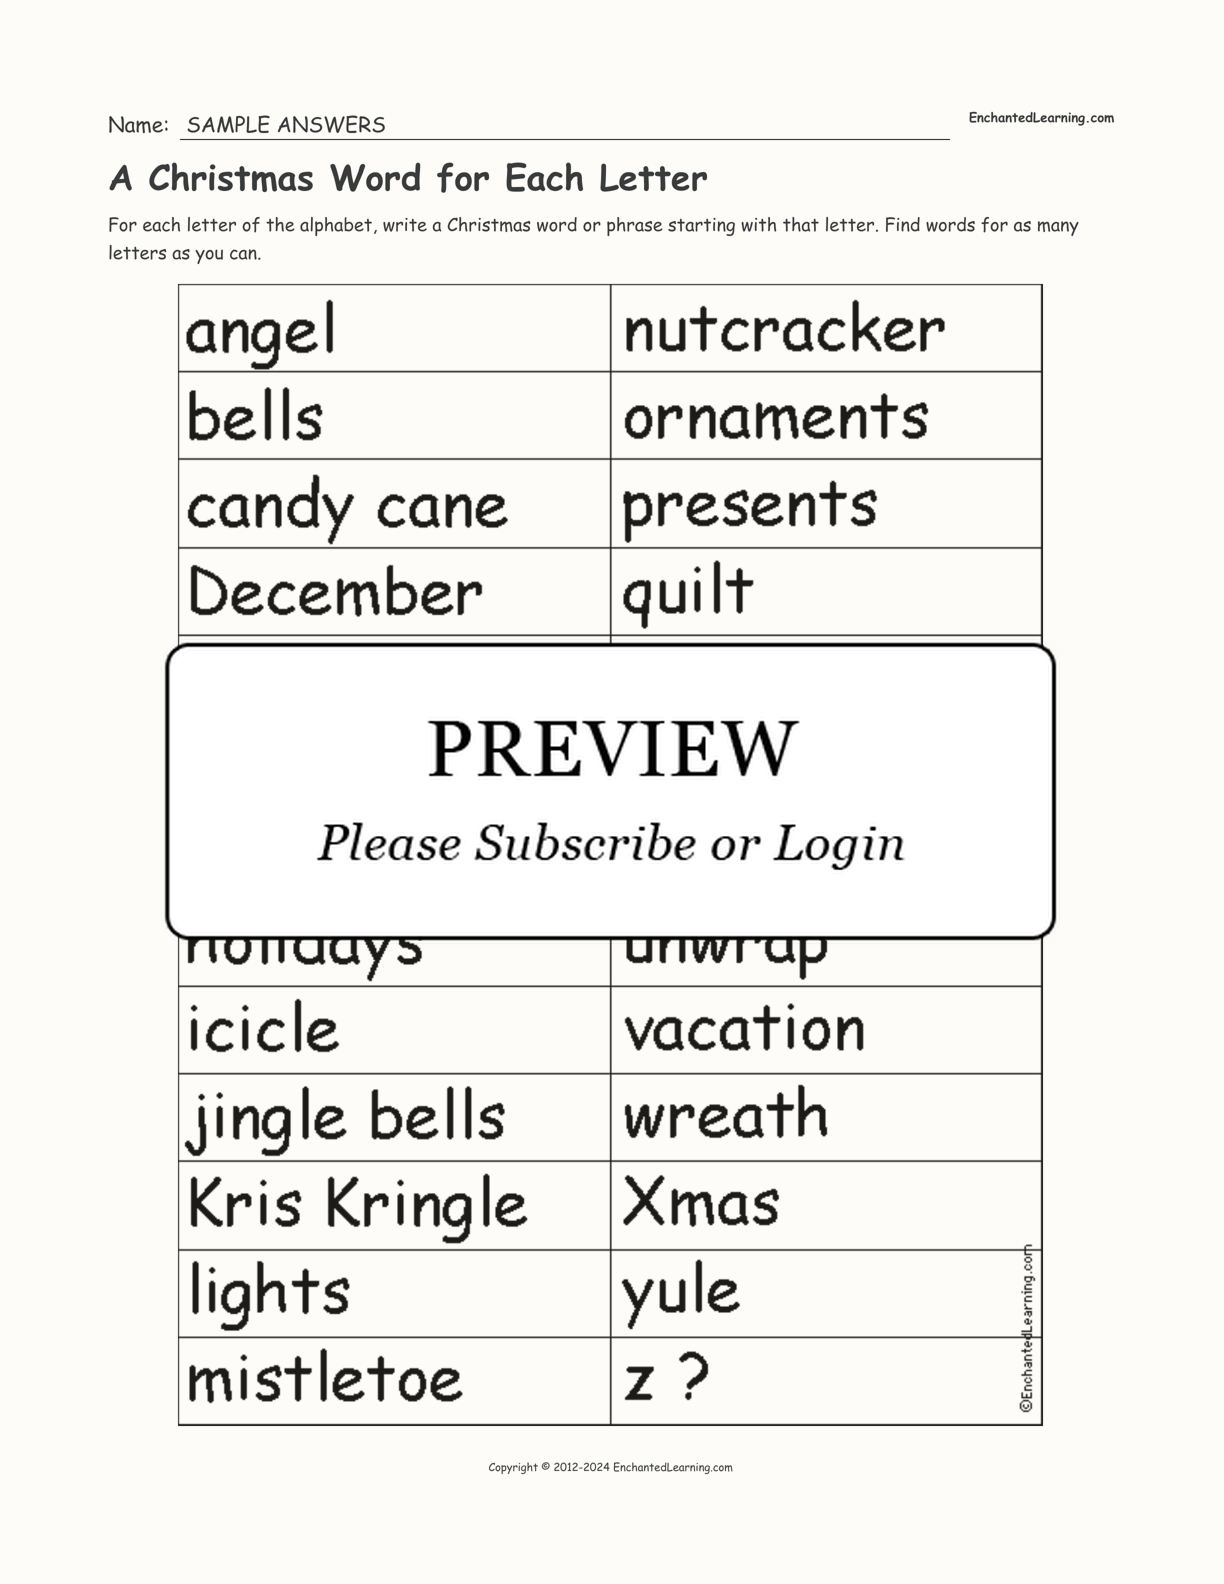 A Christmas Word For Each Letter Enchanted Learning